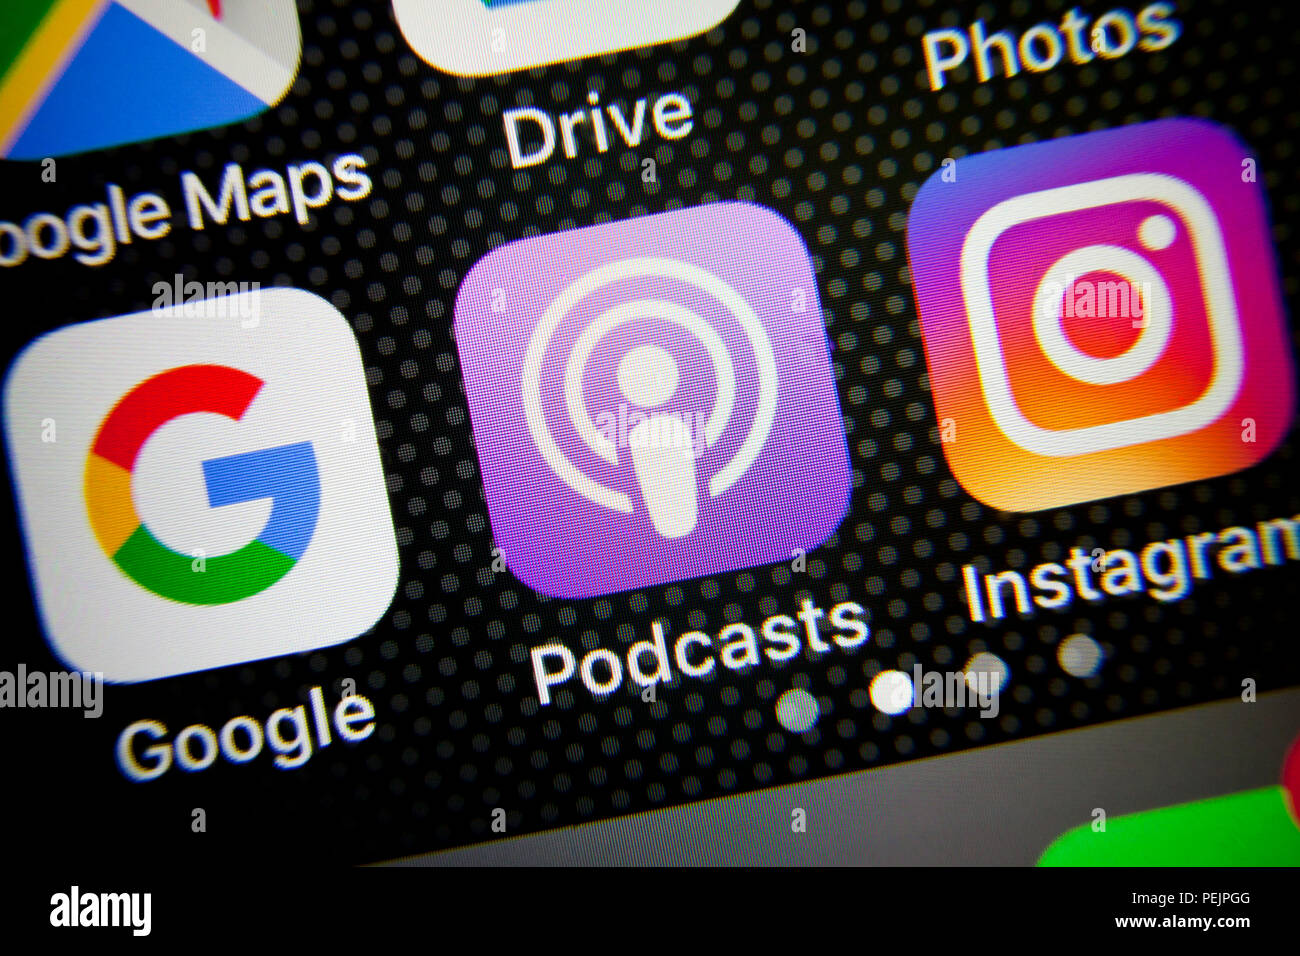 Apple Podcasts app icon on iPhone screen - USA Stock Photo